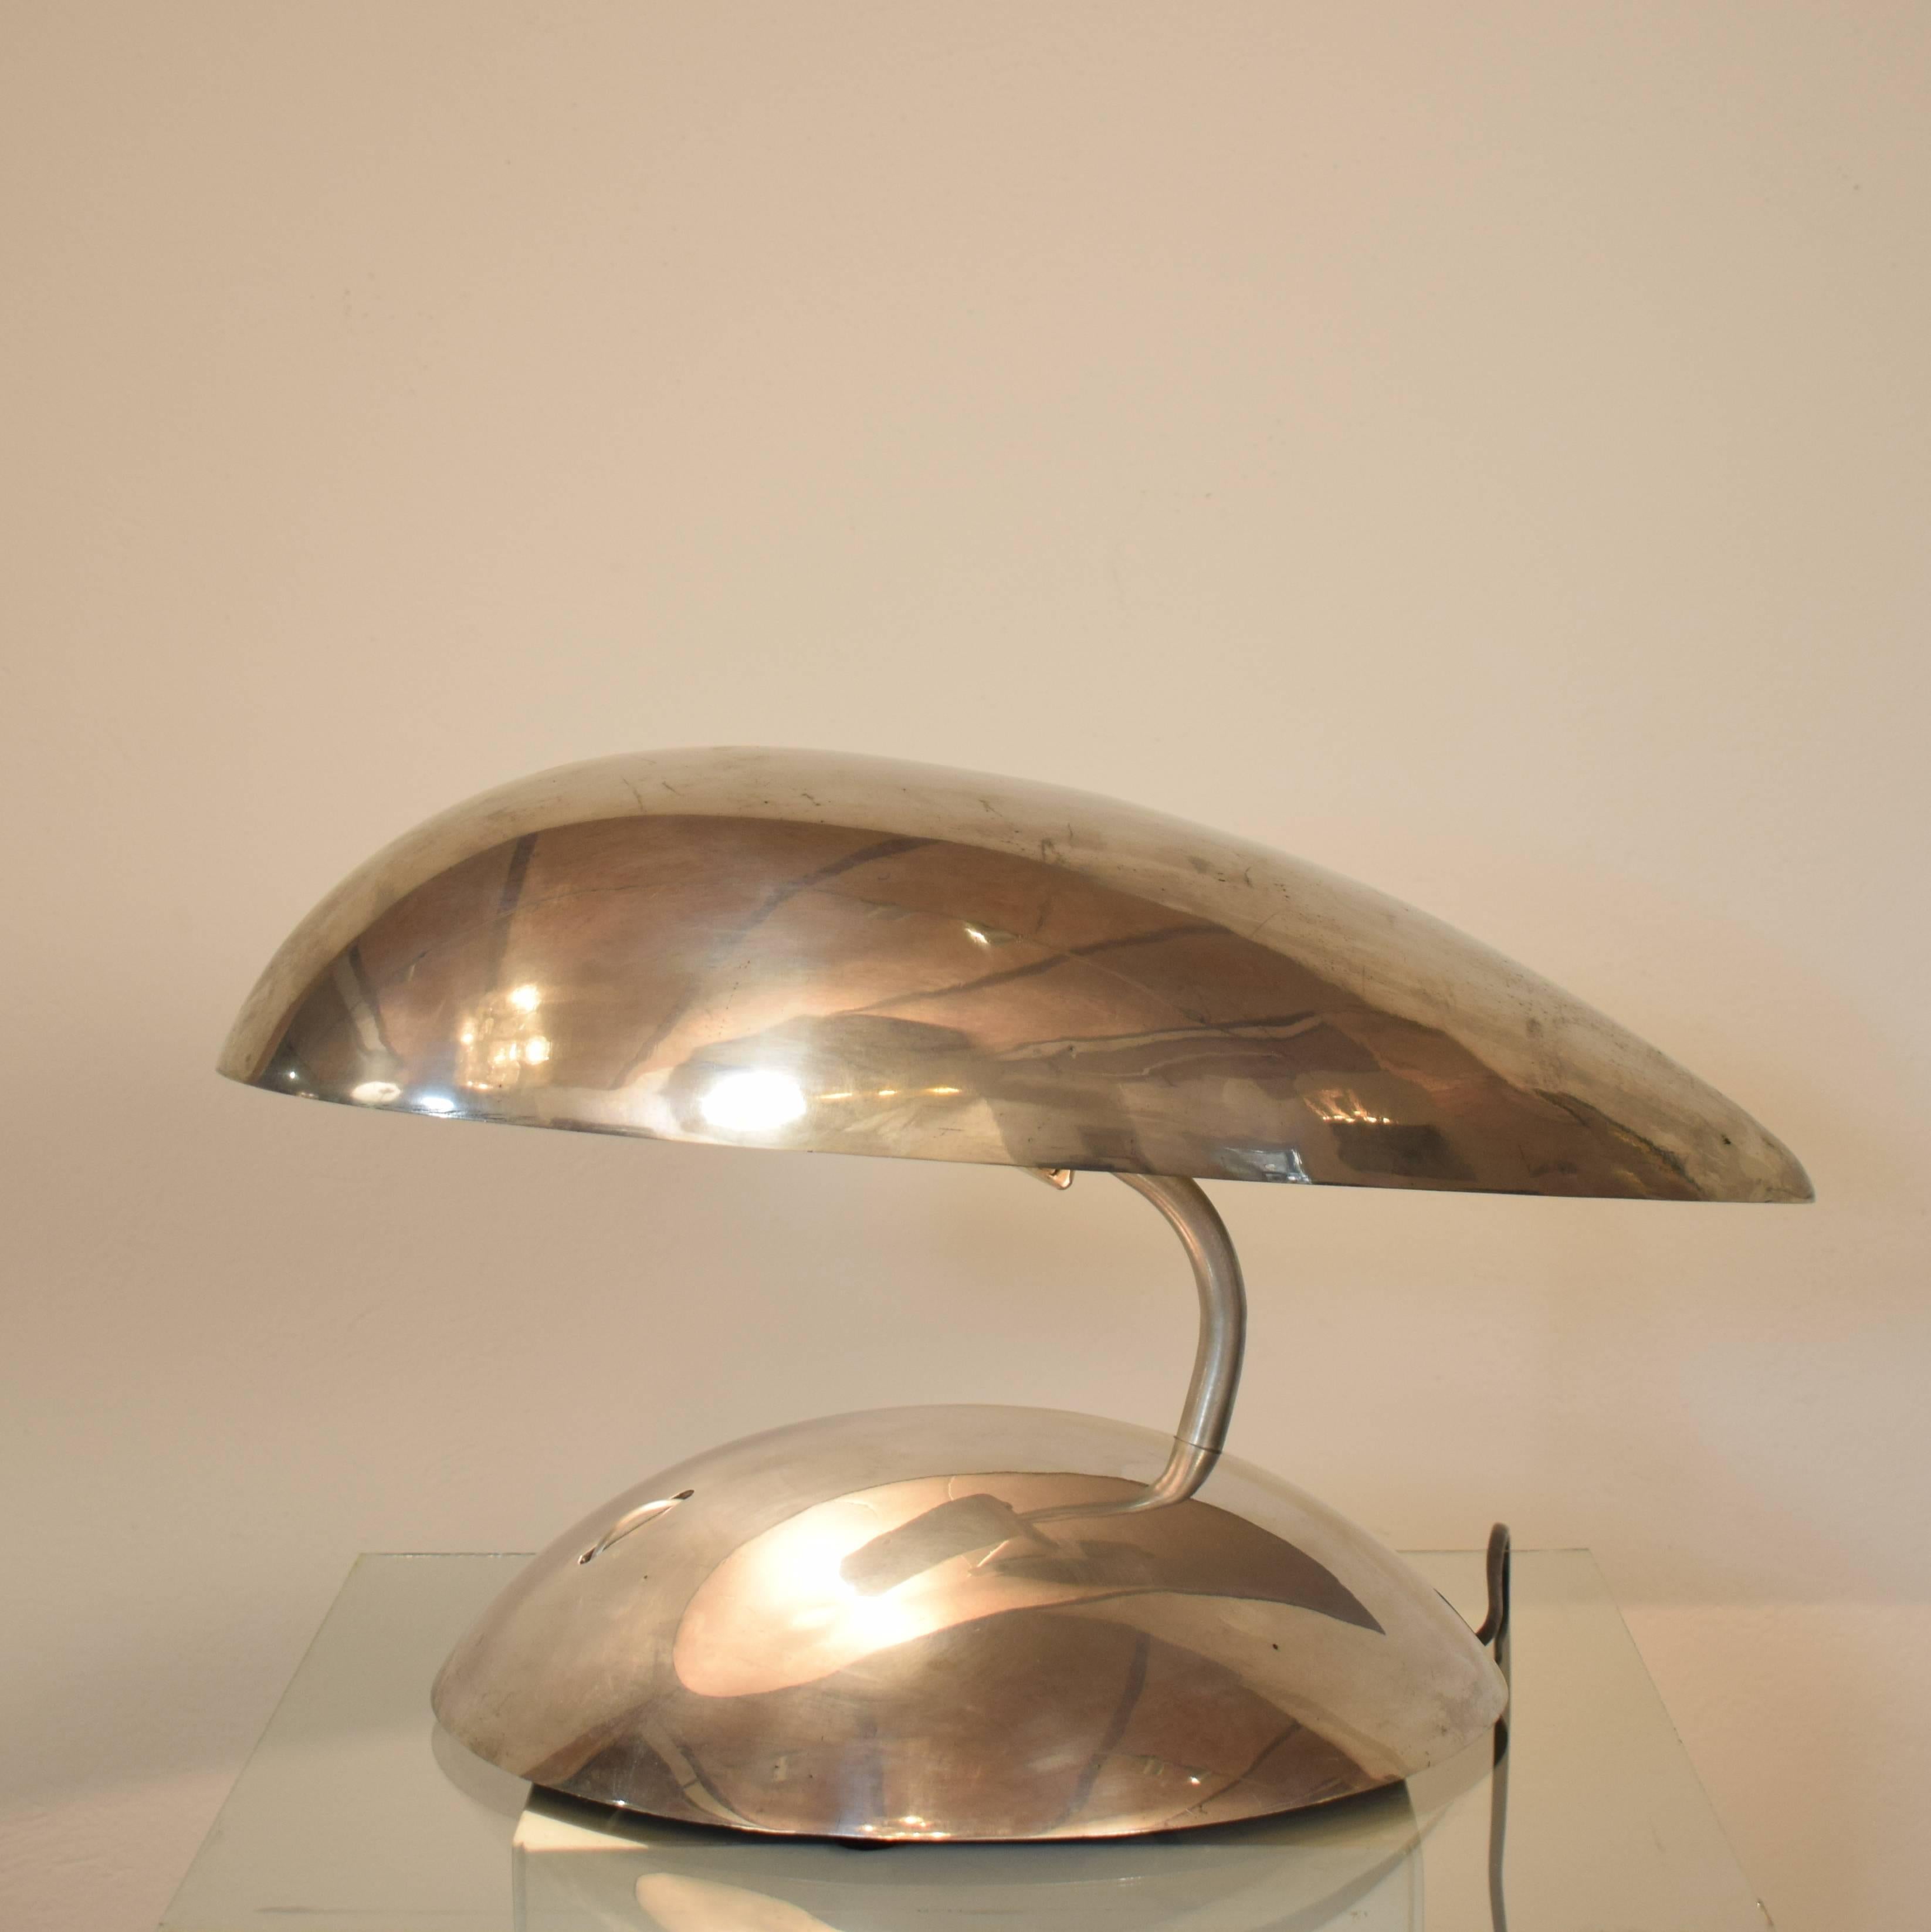 This rare Space Age table lamp is build out of aluminium which was polished afterwards.
The lamp is probably designed and made in New York in the 1980s.
The top part of the lamp can be swiveled. As well is the lamp dimmable.
A great piece for a